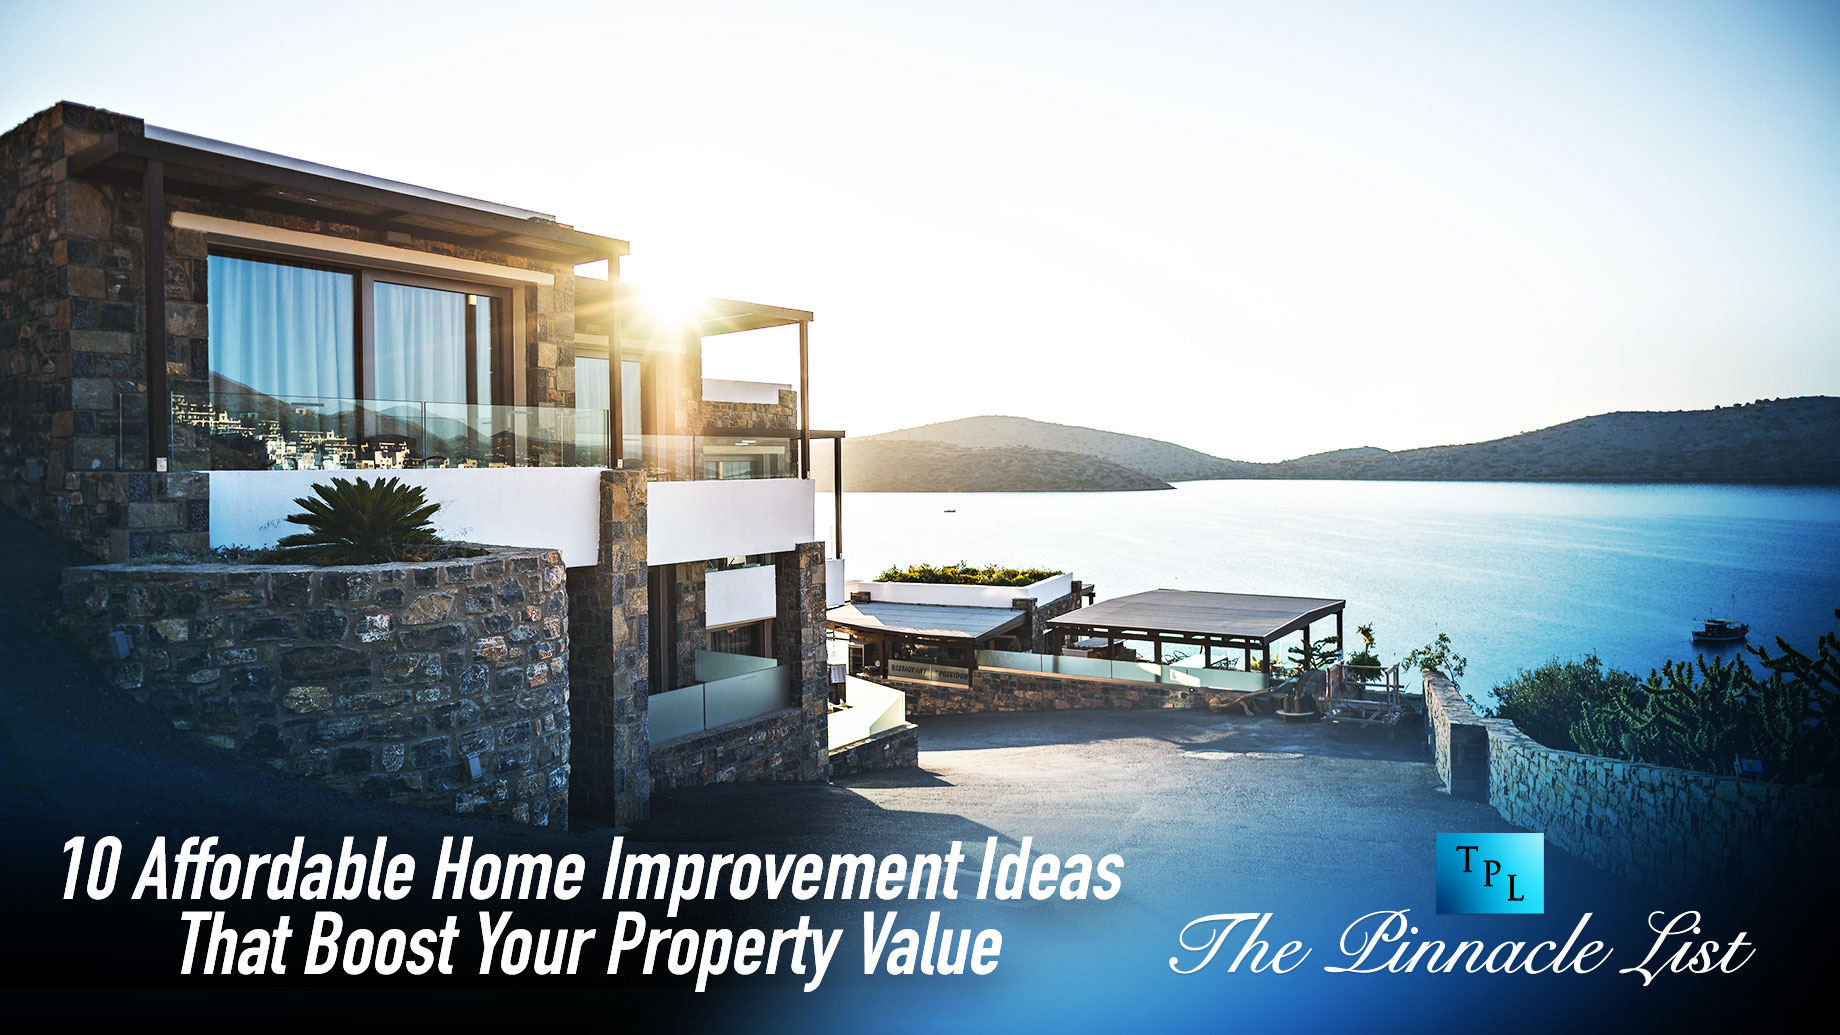 10 Affordable Home Improvement Ideas That Boost Your Property Value